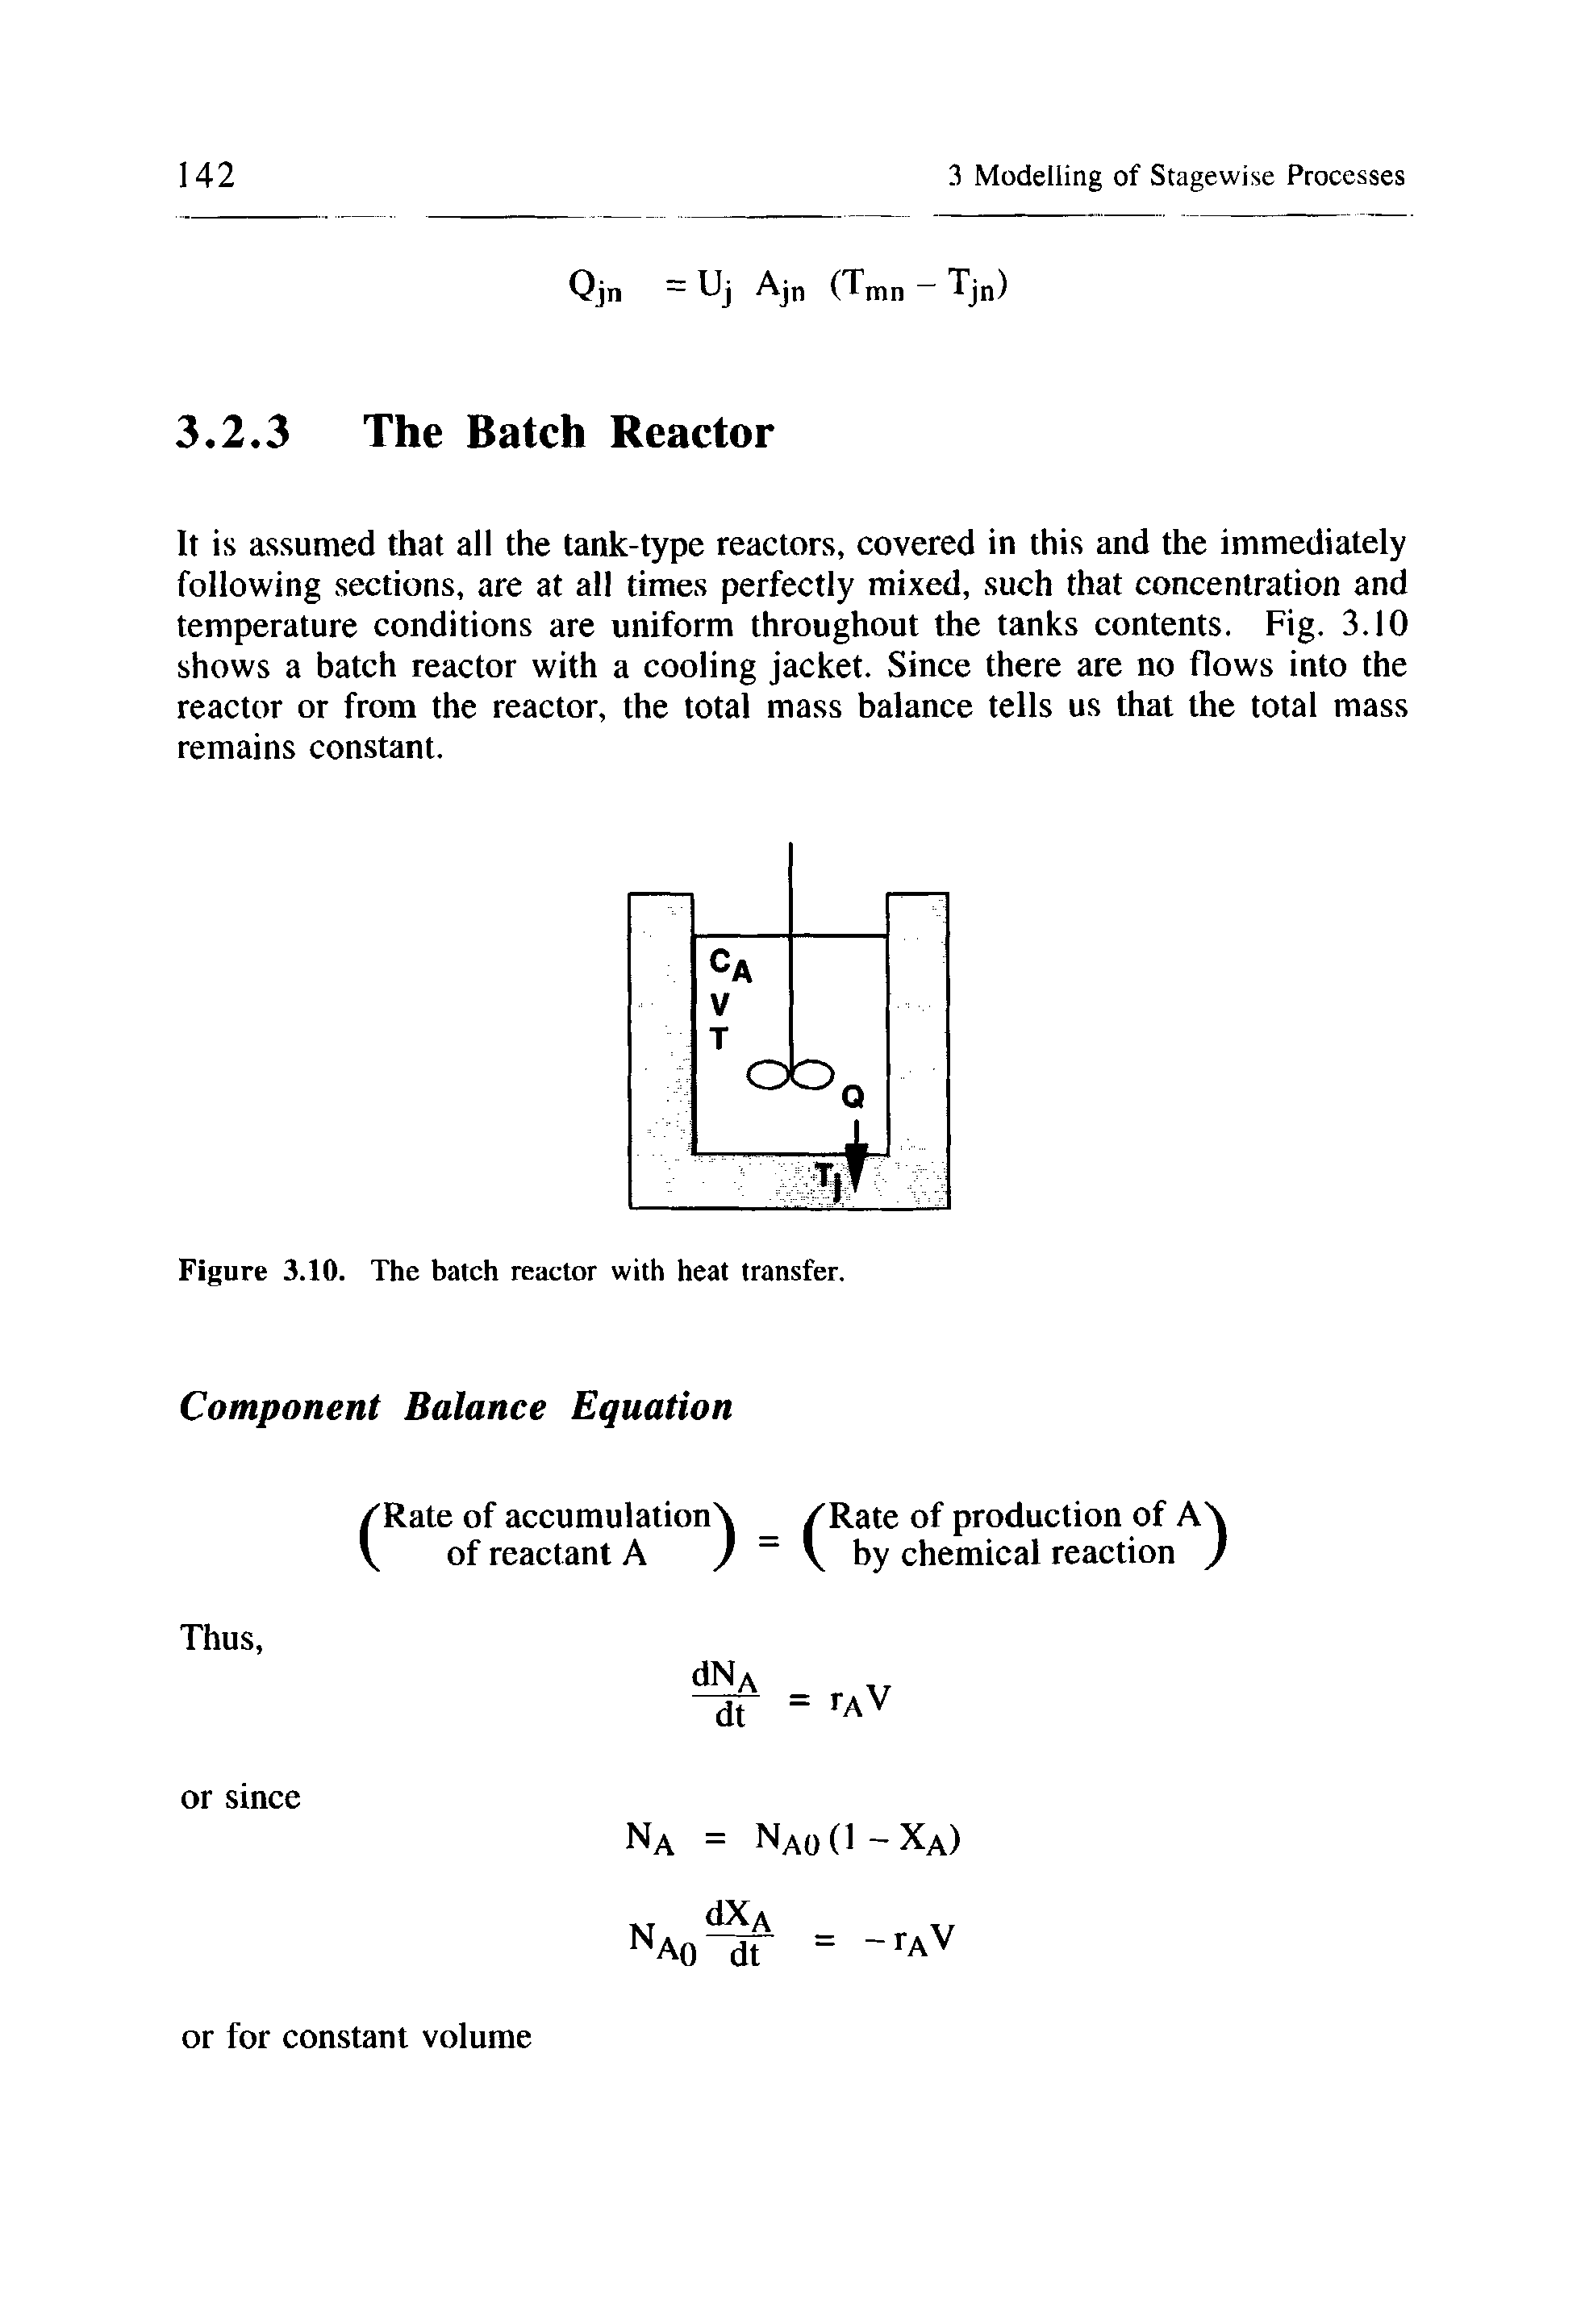 Figure 3.10. The batch reactor with heat transfer.